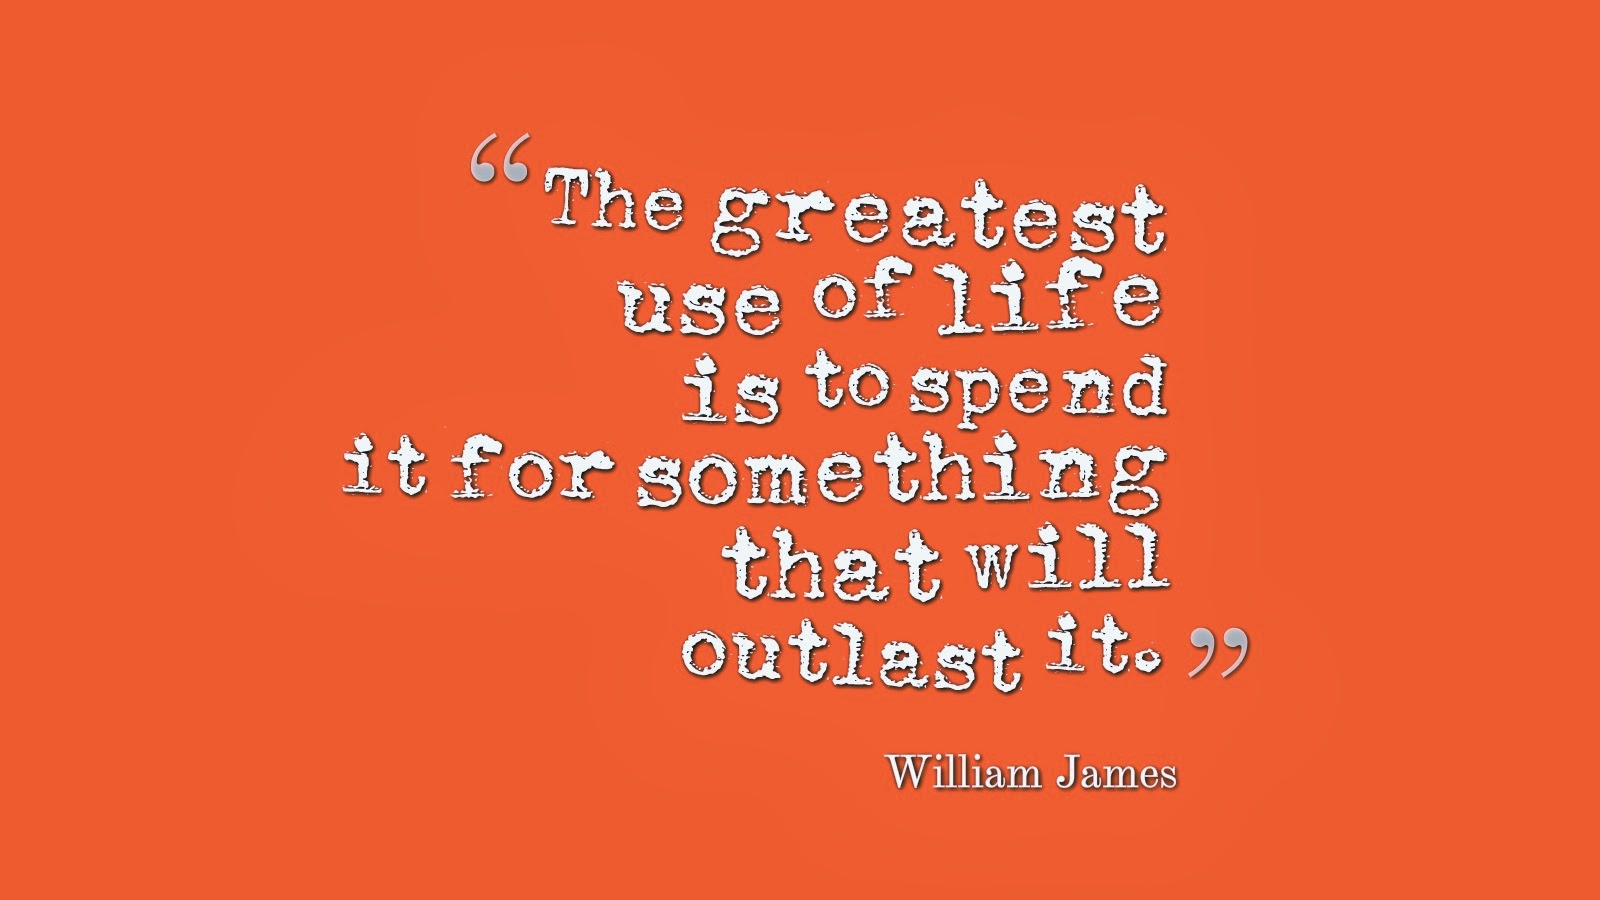 The great use of Life is to spend it for something that will Outlast it William James. The great use of Life is to spend it for something that will Outlast it. I spend my life